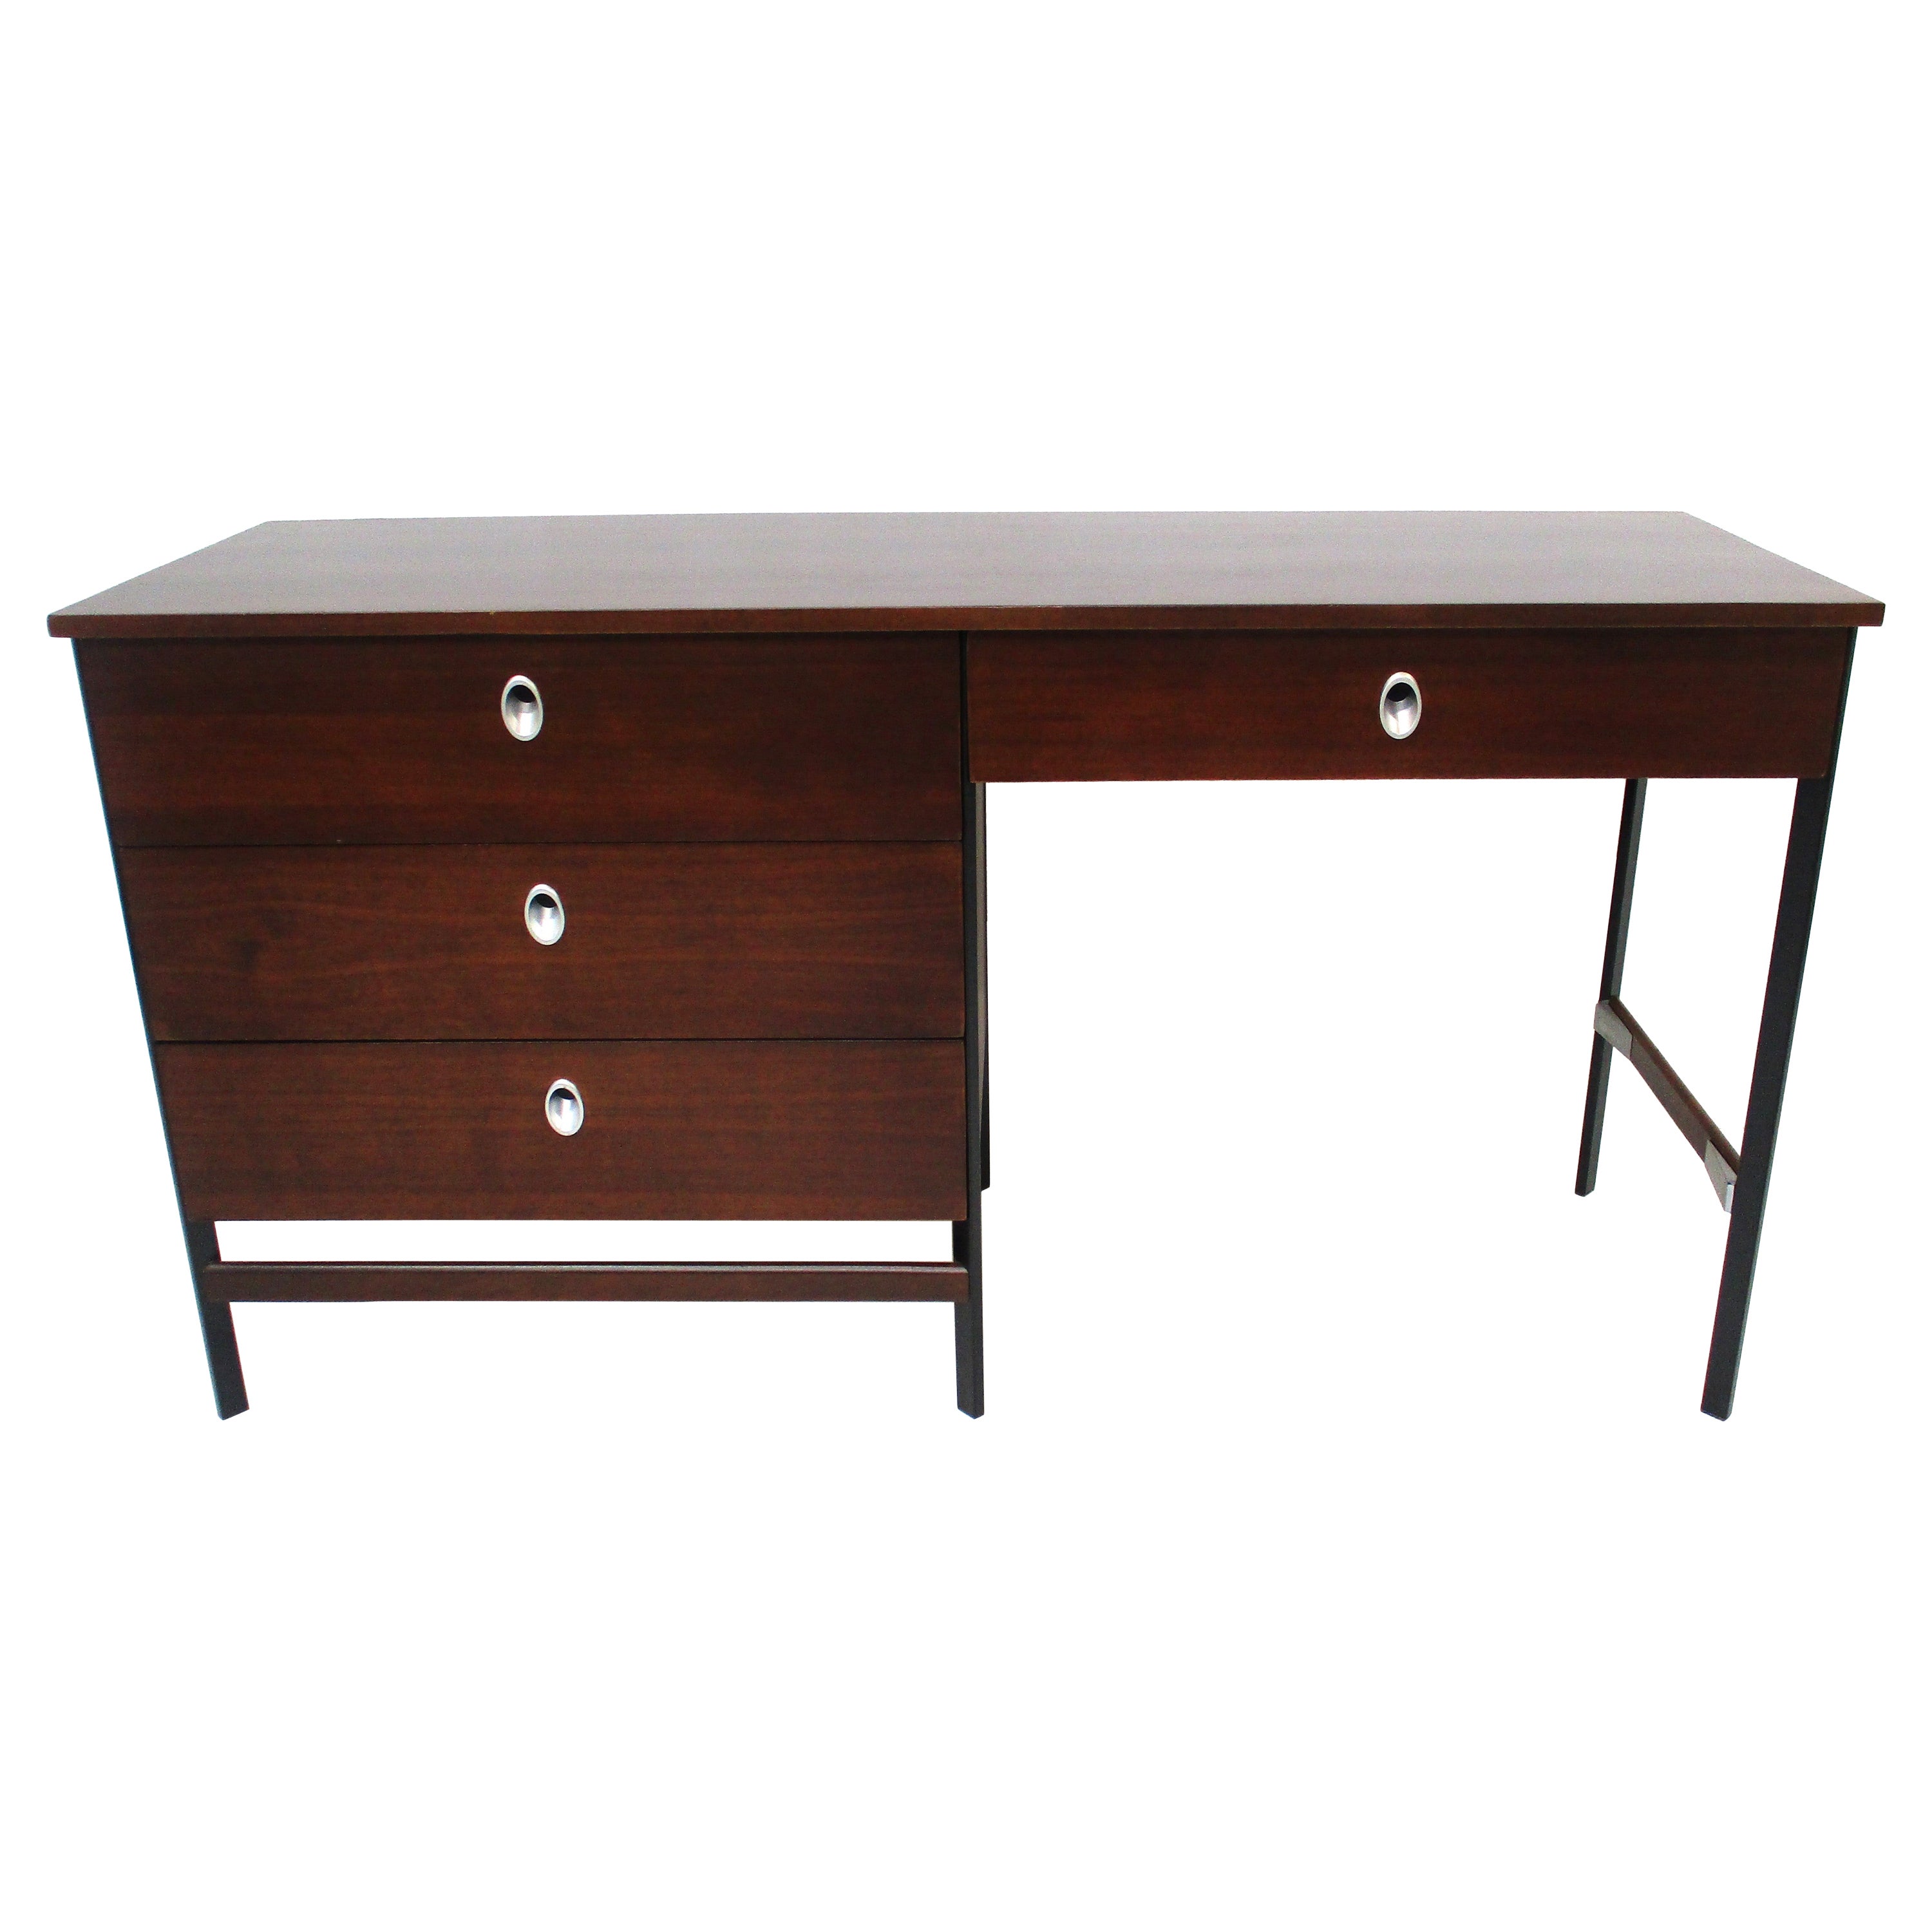 Mid Century Walnut Desk by Vista of California in the style of George Nelson   For Sale